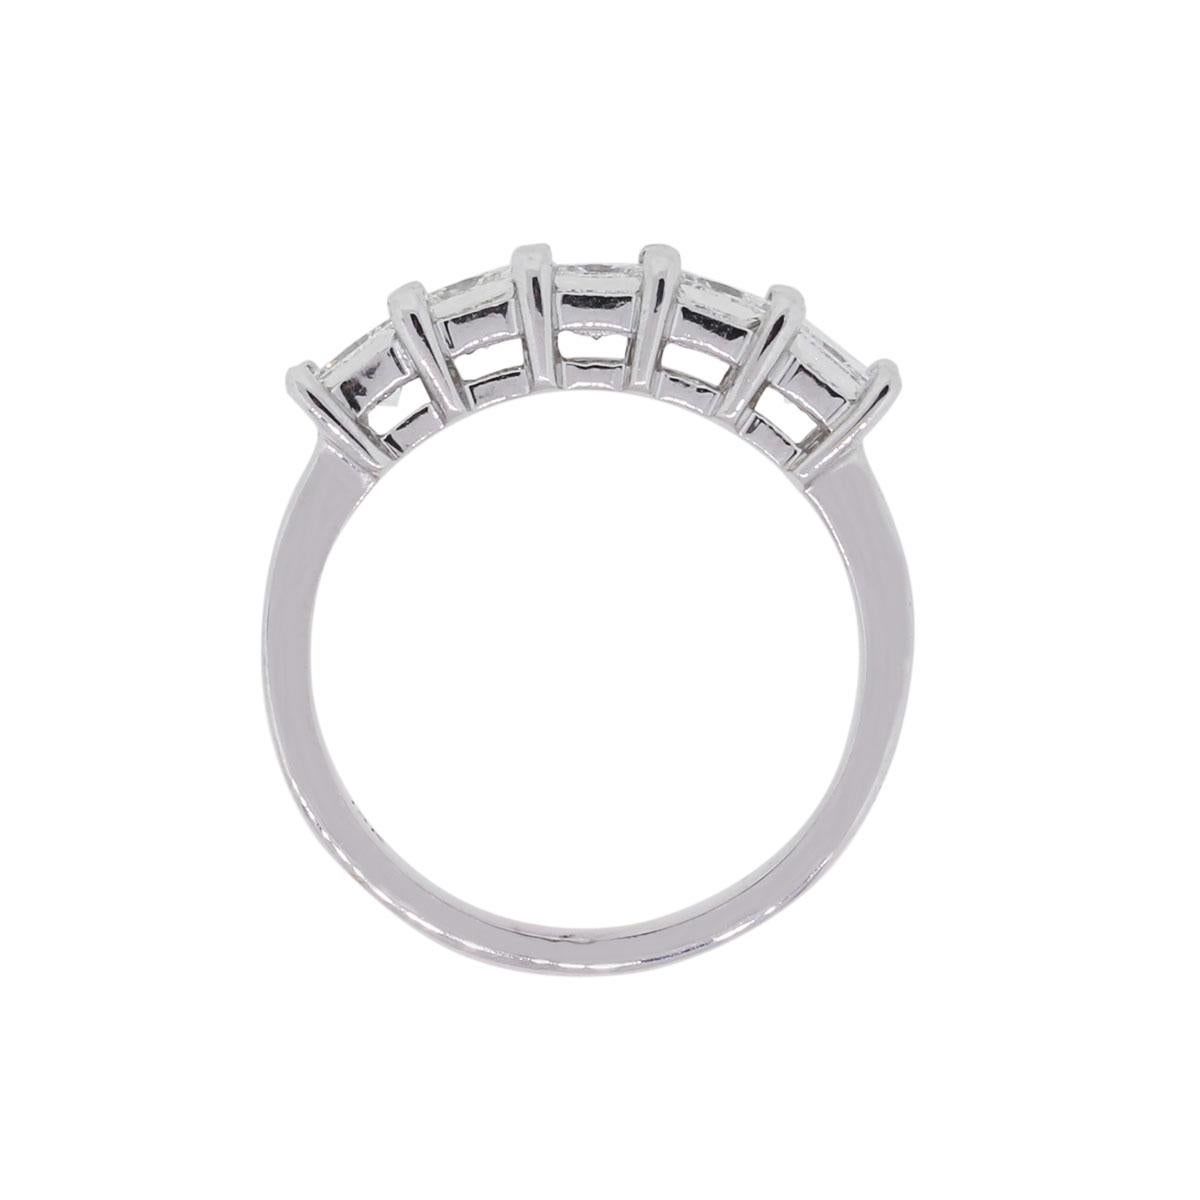 Material: 18k white gold
Diamond Details: Approximately 1.25ctw of princess cut diamonds (5 total). Diamonds are G/H in color and VS in clarity
Ring Size: 5.75 (can be sized)
Ring Measurements: 0.87″ x 0.18″ x 0.78″
Total Weight: 3.9g